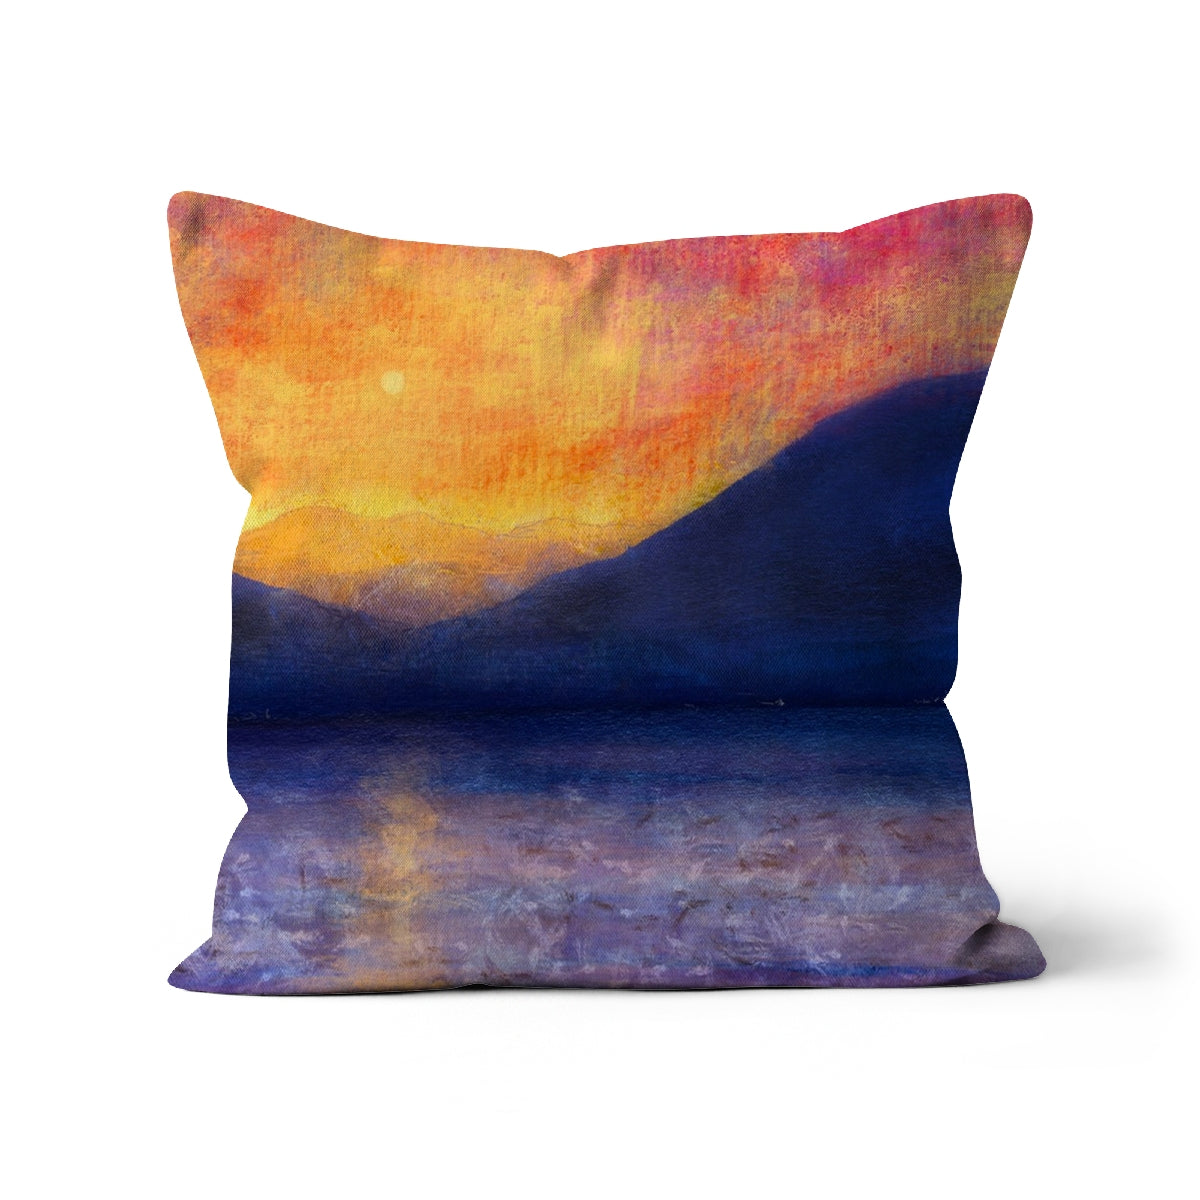 Sunset Approaching Mull Art Gifts Cushion-Cushions-Hebridean Islands Art Gallery-Linen-16"x16"-Paintings, Prints, Homeware, Art Gifts From Scotland By Scottish Artist Kevin Hunter